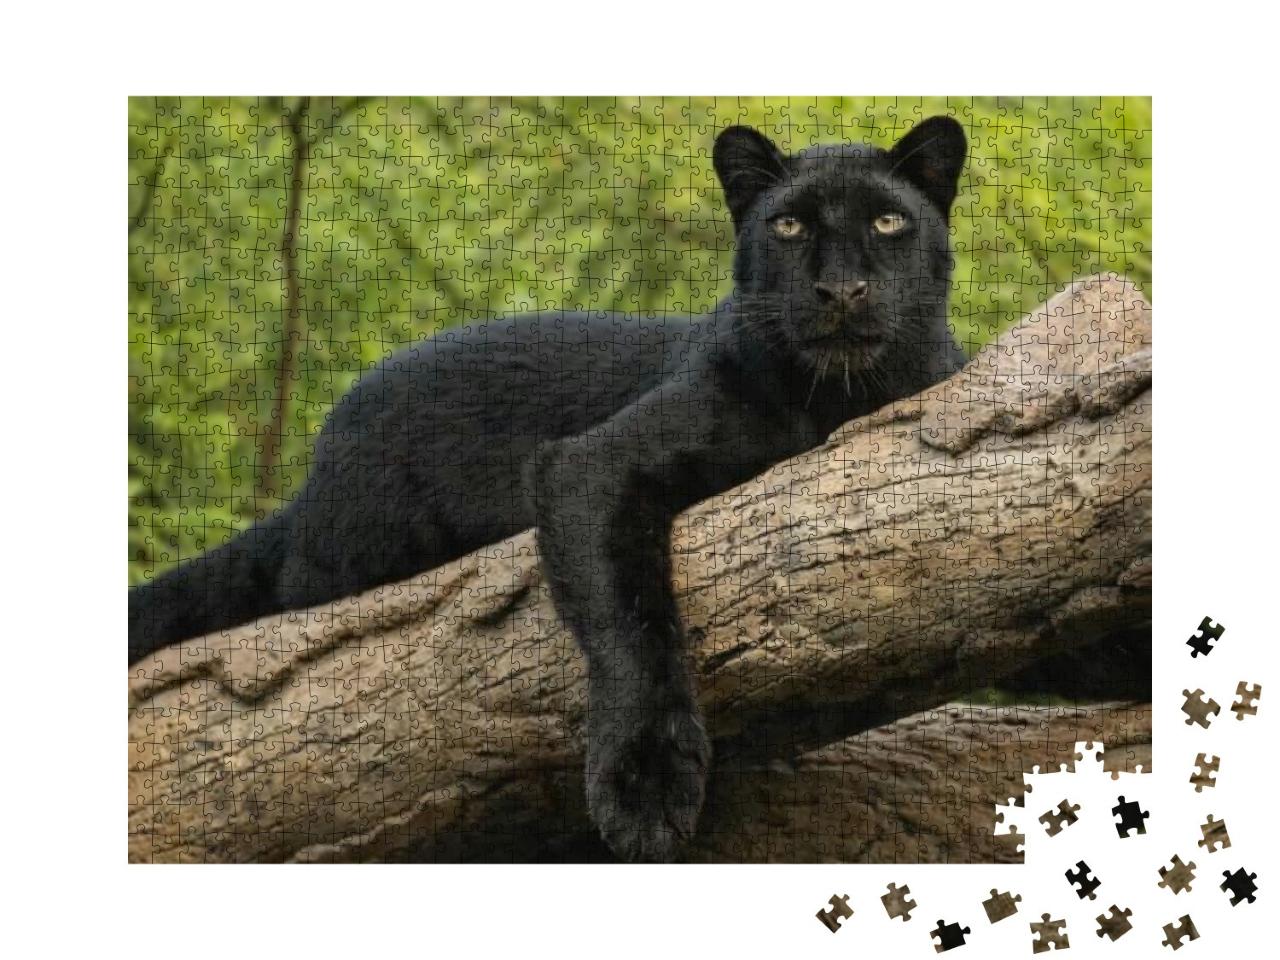 Wild Cat, Black Panther Perched on a Log... Jigsaw Puzzle with 1000 pieces